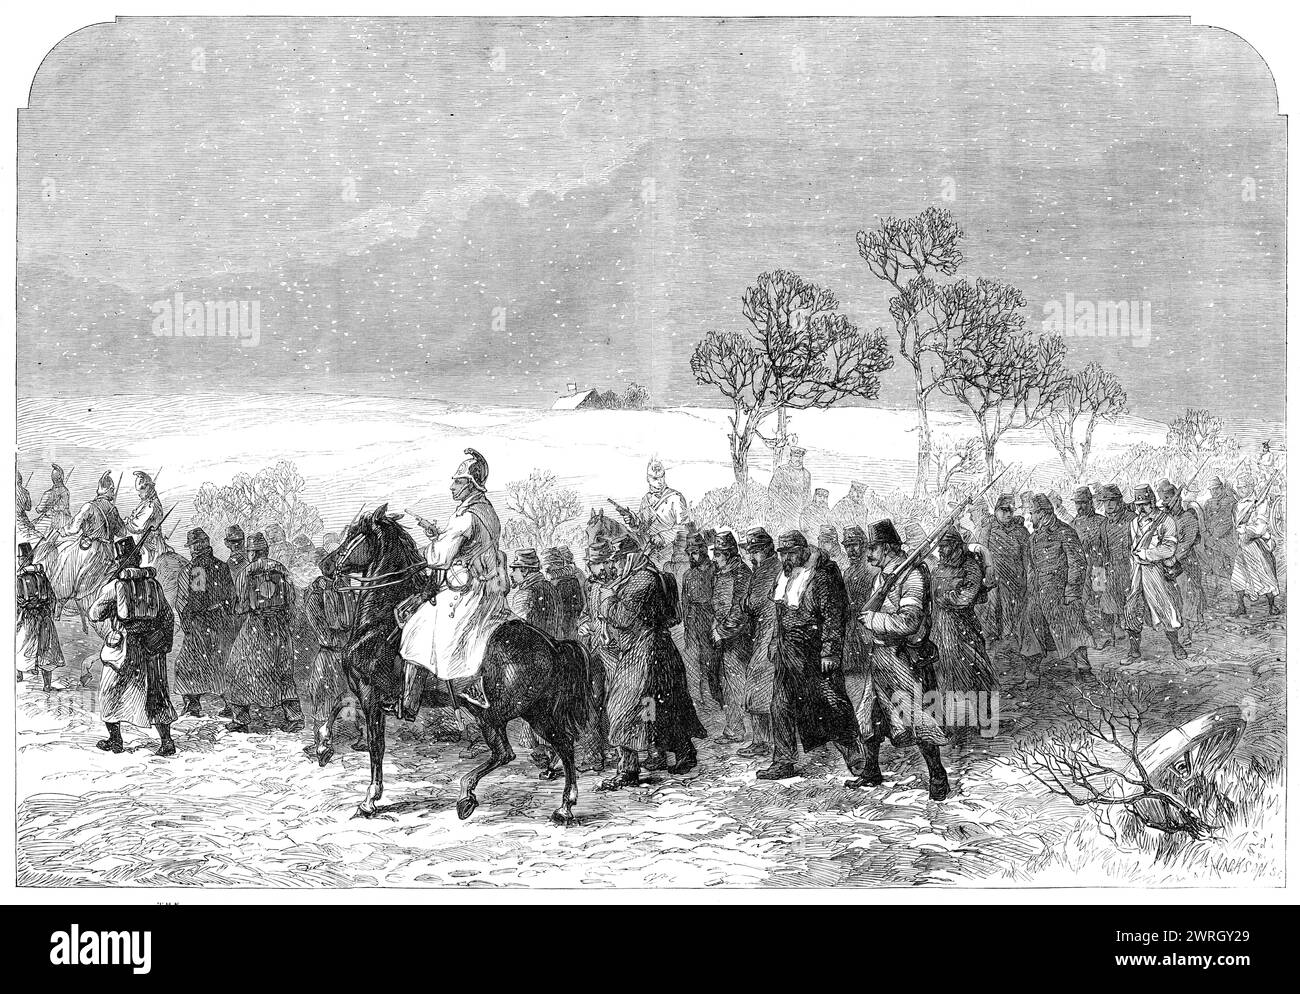 The War in Schleswig: Danish prisoners on the road to Rendsburg after the Battle of Over-Selk - from a sketch by our special artist, 1864. 'No exact account can be given of the Danish loss. Many dead and wounded were left upon the field, about 100 prisoners were brought in, and a gun was captured in the advance by the 18th Jager battalion...The country between Breckendorf and Over-Selk was of the bleakest and most inhospitable description...Hedges there were none, as the Danes had cut down what few there existed previously to their retreat. The villages and farmhouses are few in number and at Stock Photo